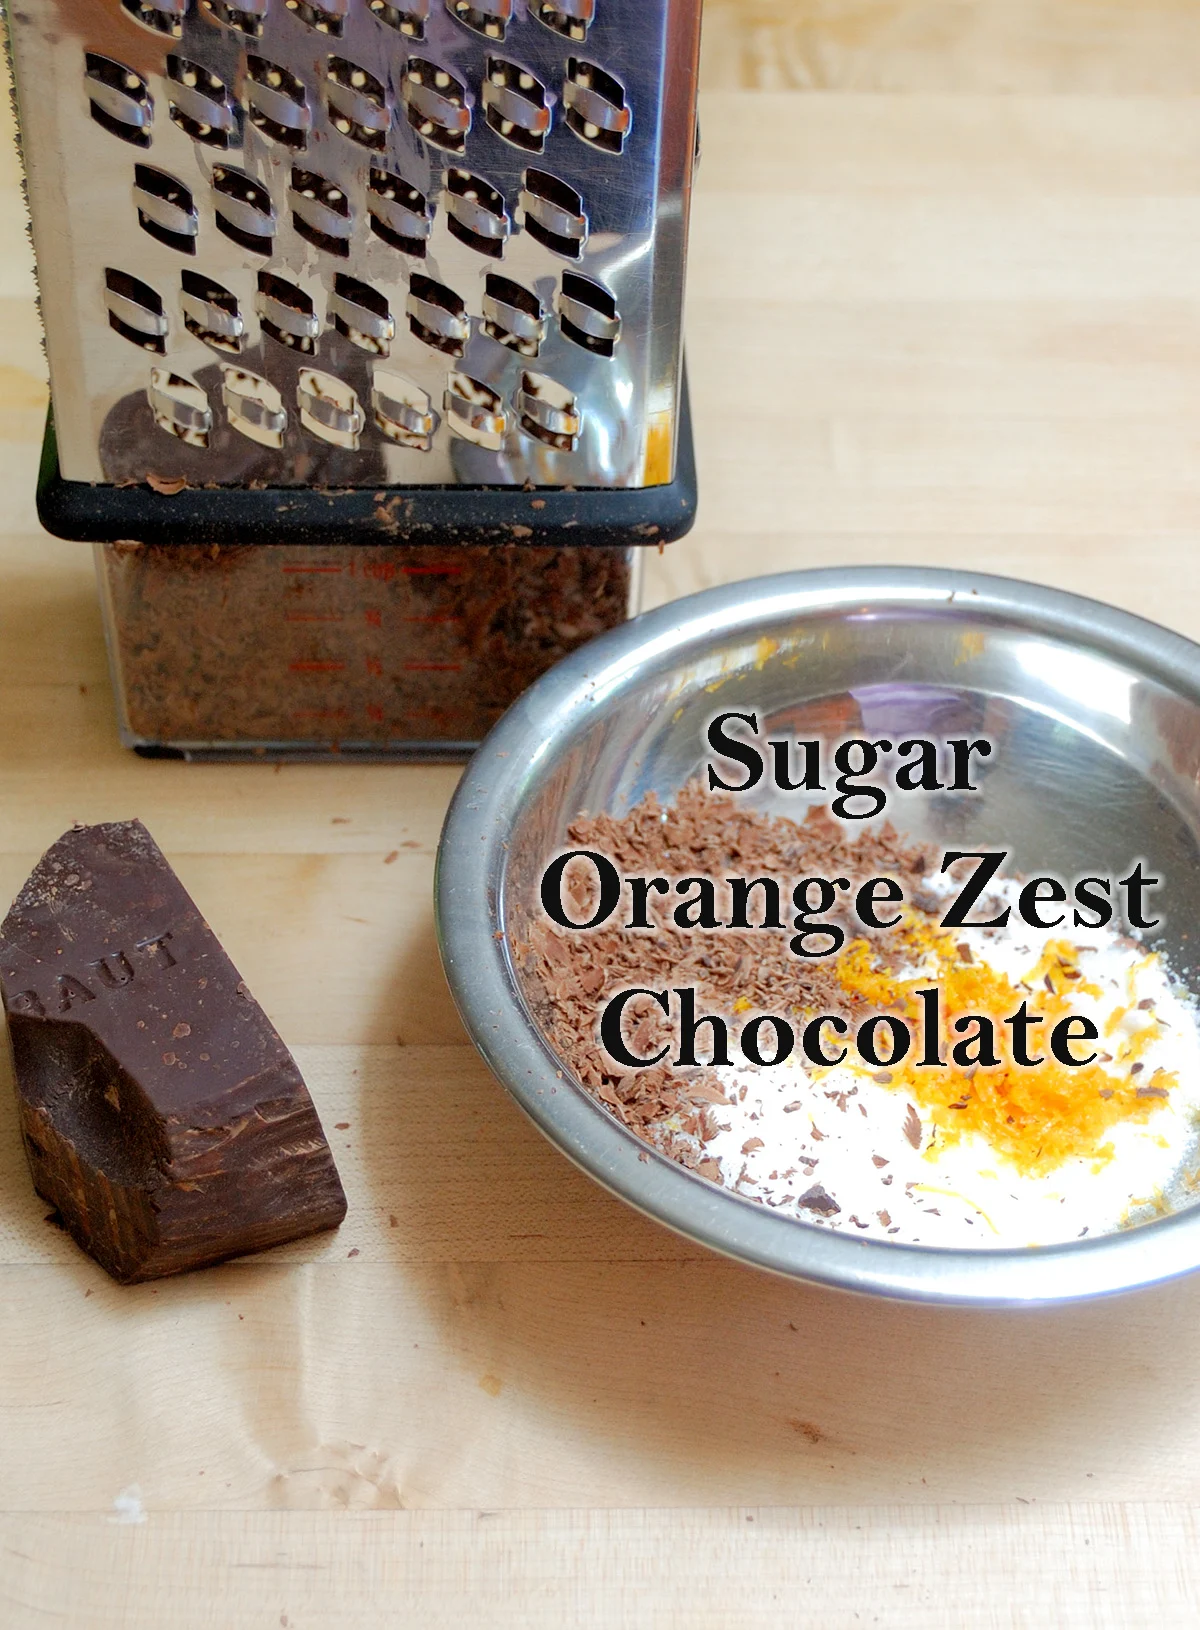 A grater, a piece of chocolate and a bowl with sugar, orange zest and chocolate.